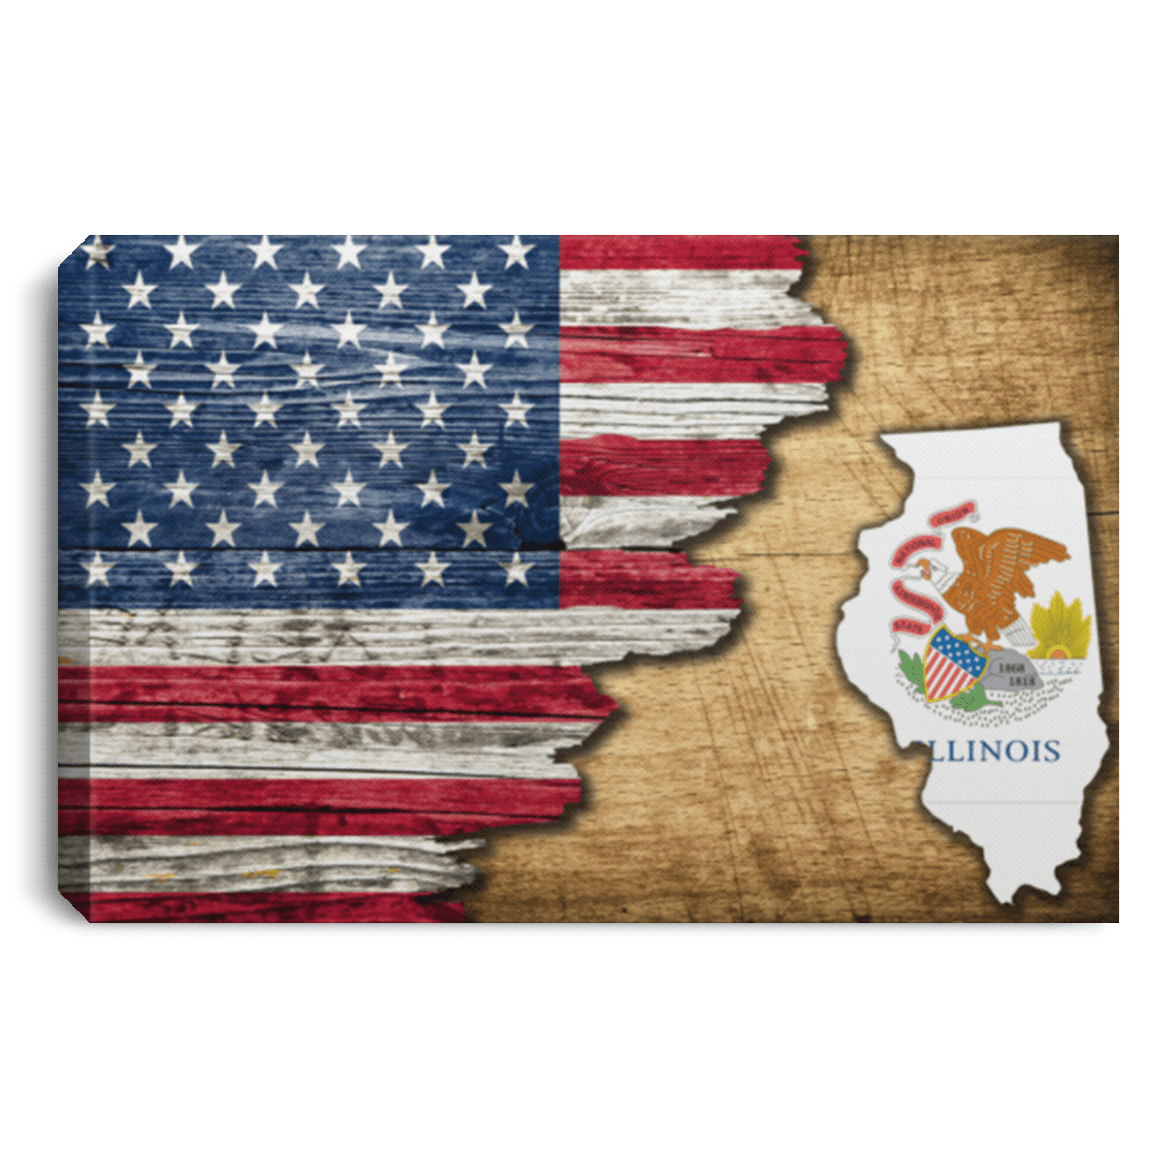 United States/Illinois Flag Ripped Effect 18X12 Inches Landscape Canvas .75In Frame